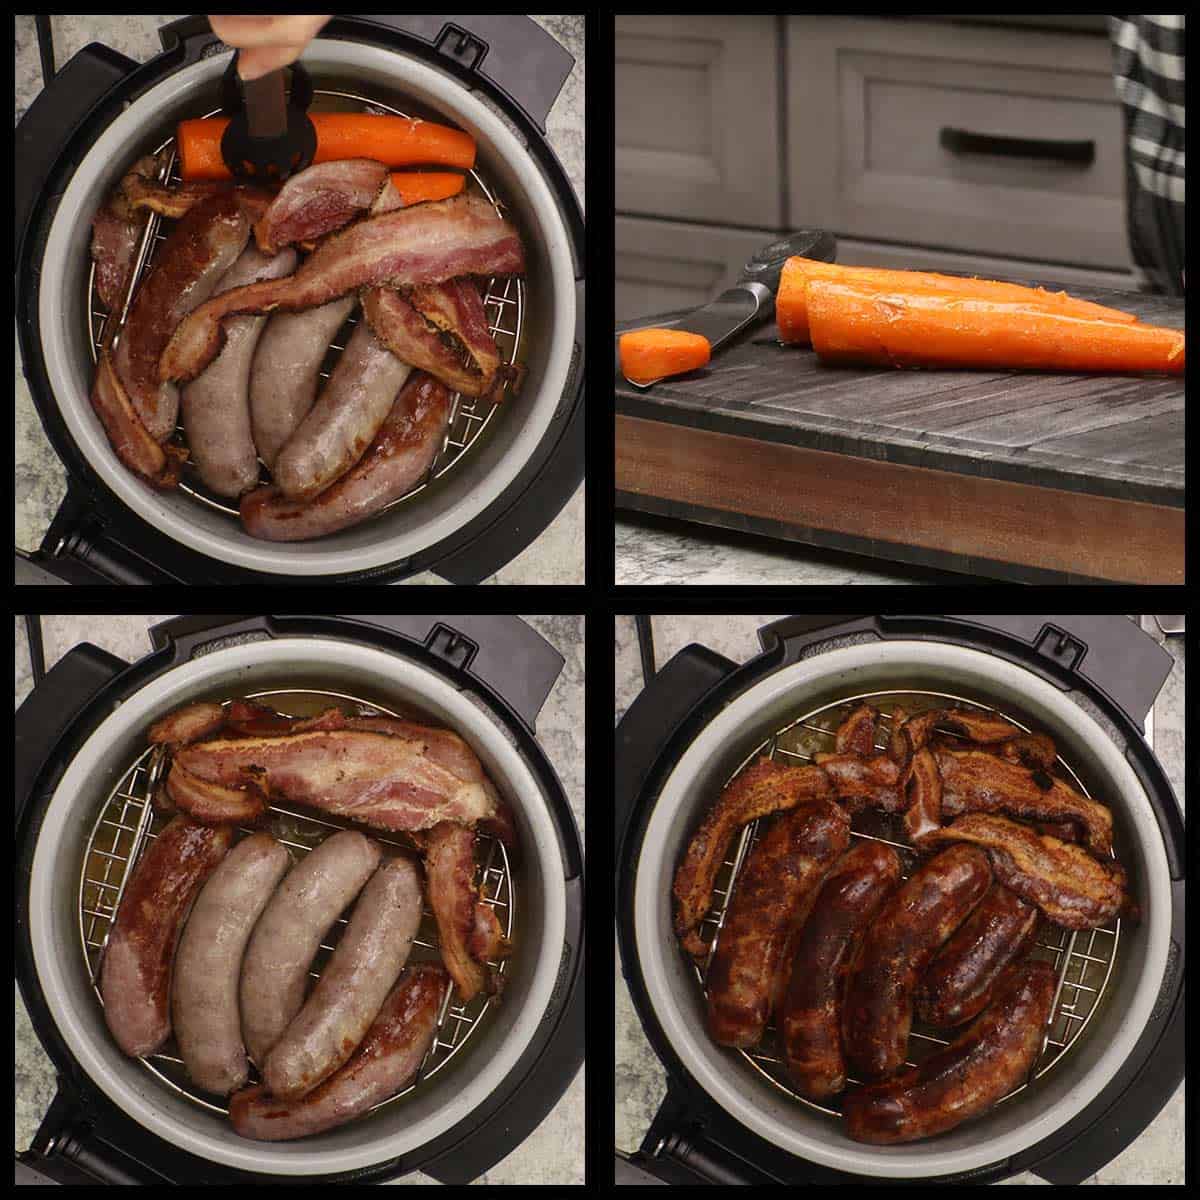 removing the carrots and flipping the sausage and bacon. 